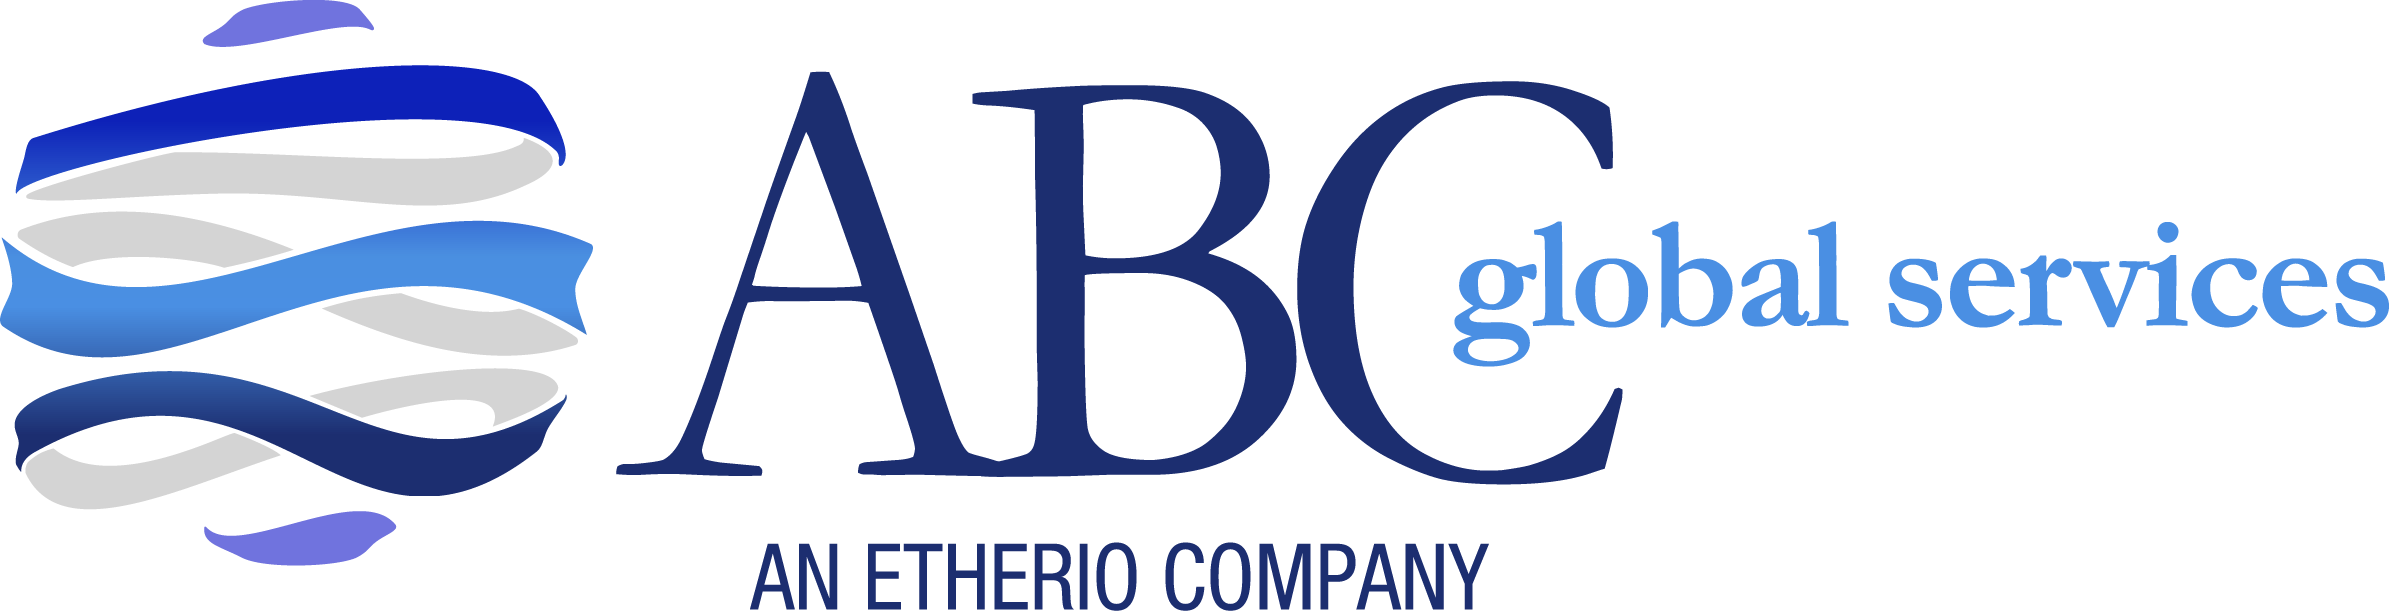 ABC Global Services